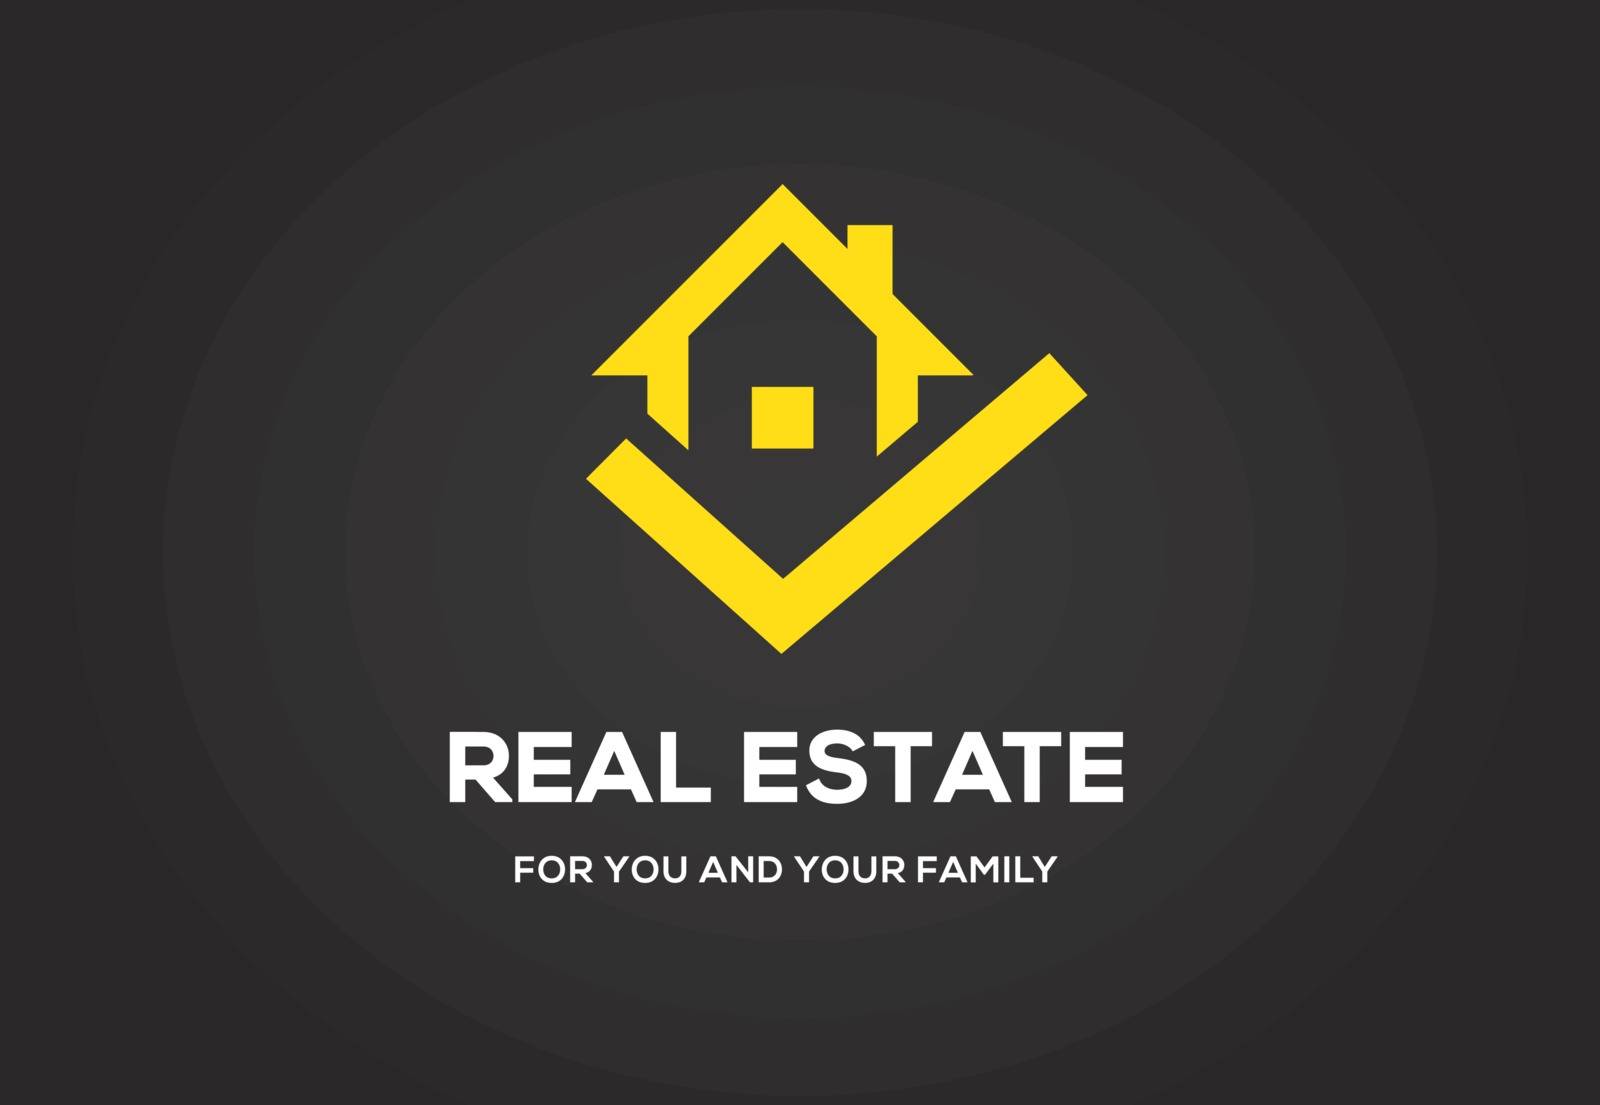 Template logo for real estate agency or cottage town elite class by ckybes